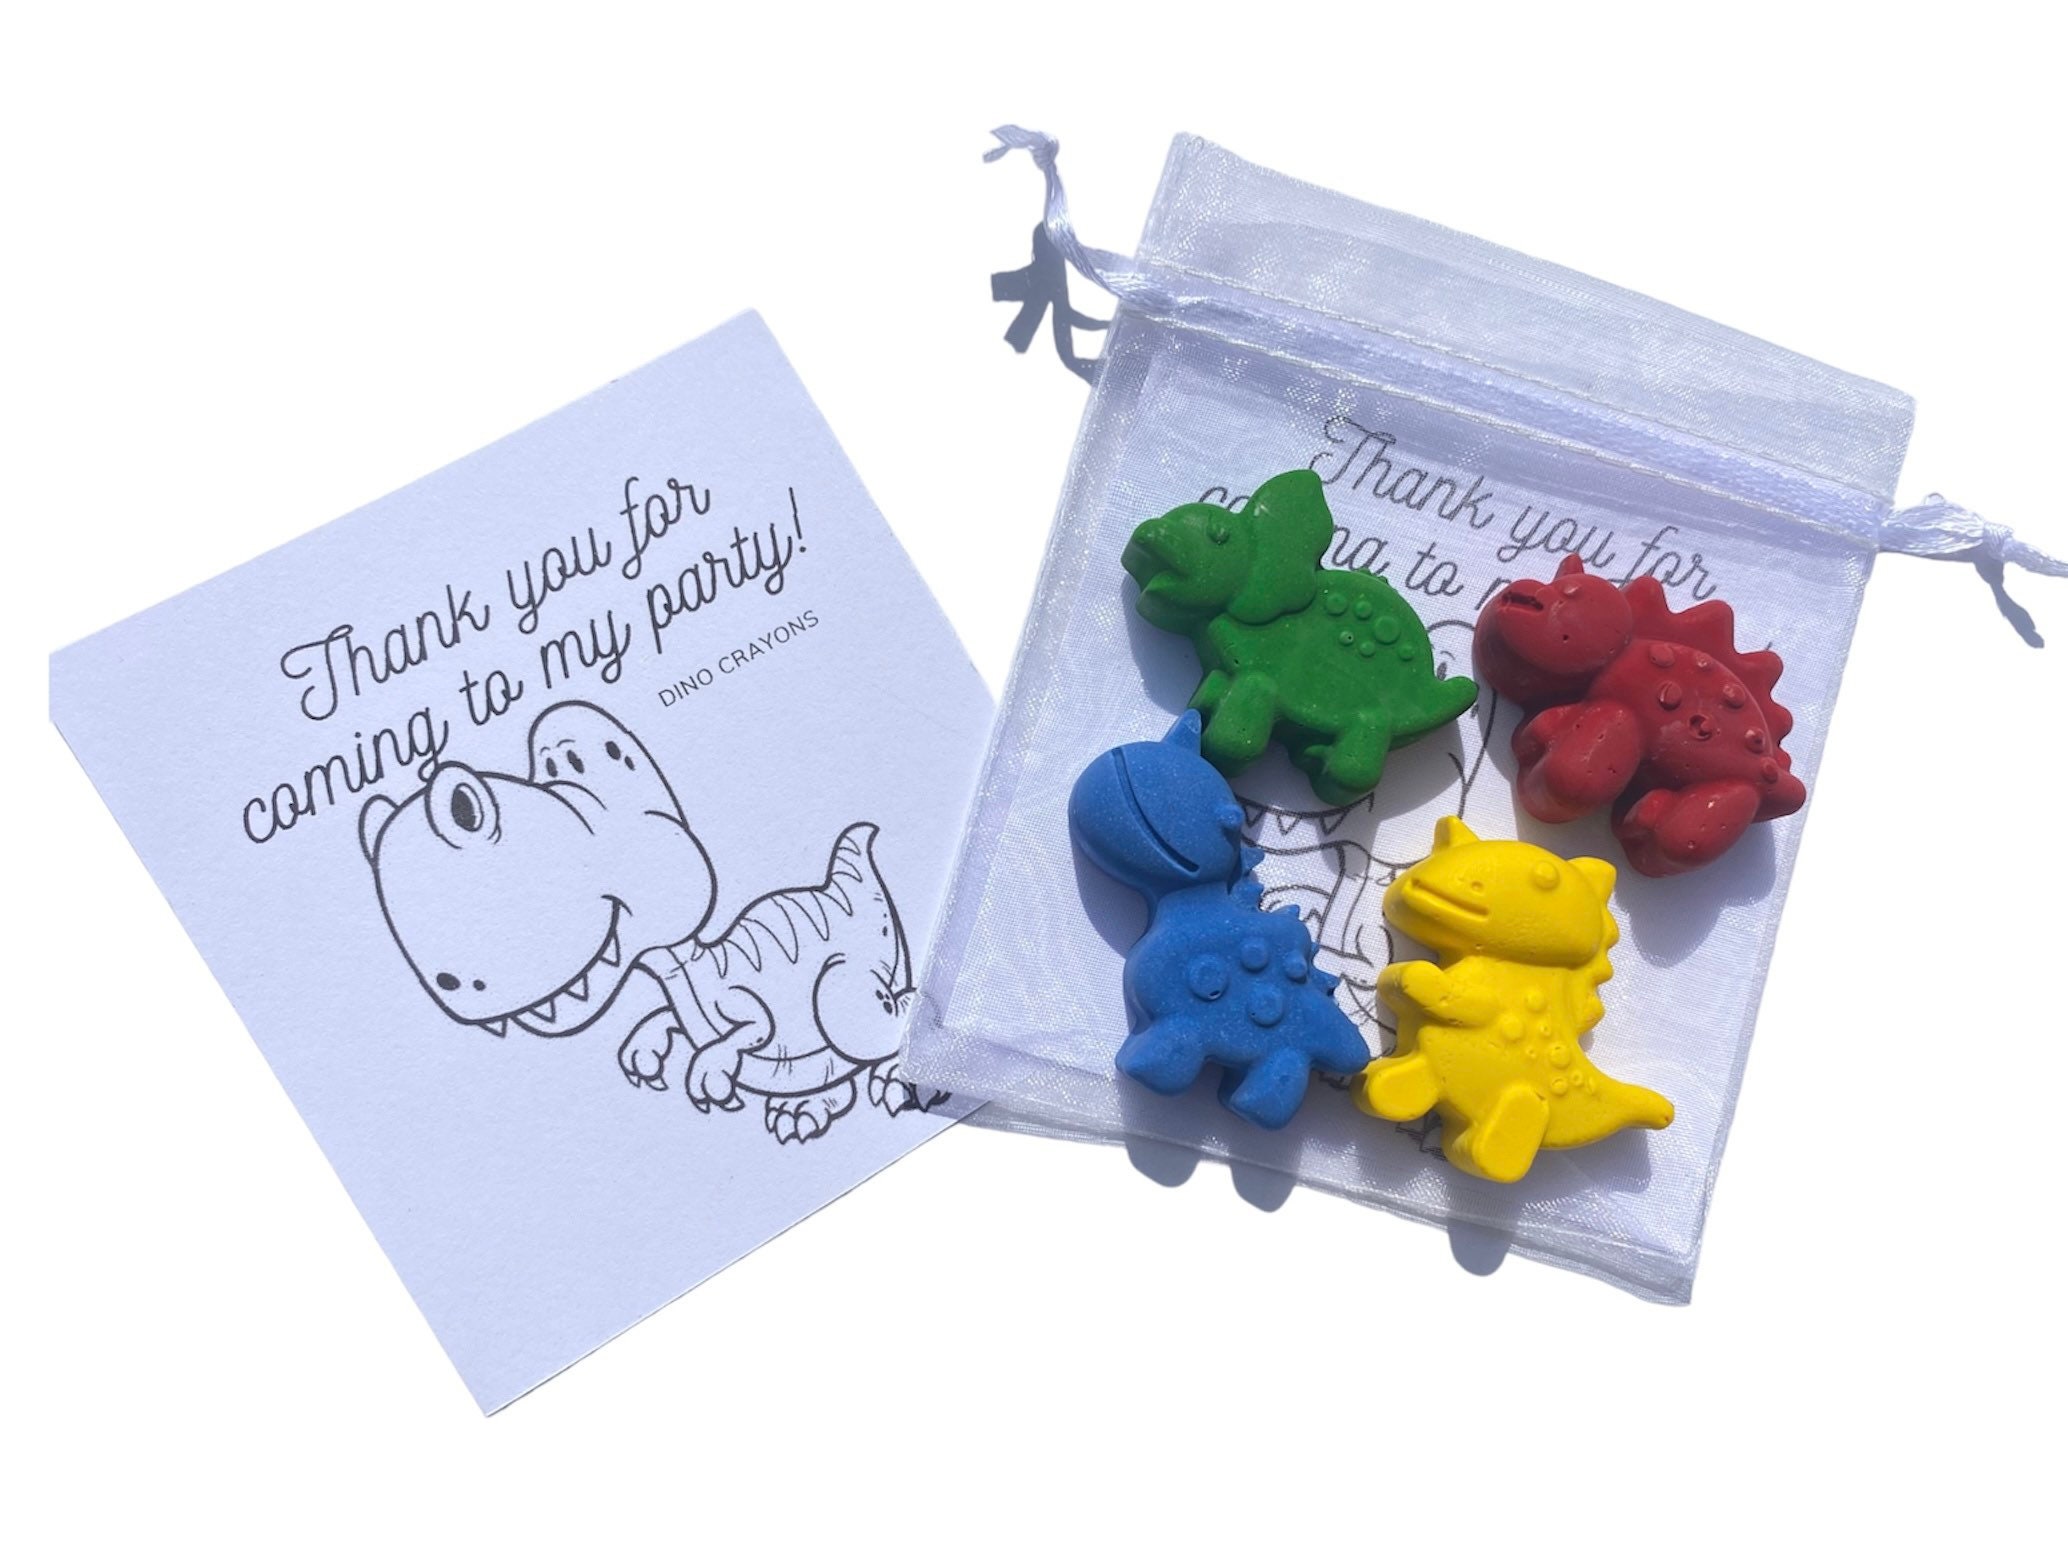 MASSRT Dinosaur Crayons for Toddlers, 12 Colors 99% Unbreakable Non-toxic  Crayon Gifts, Easy to